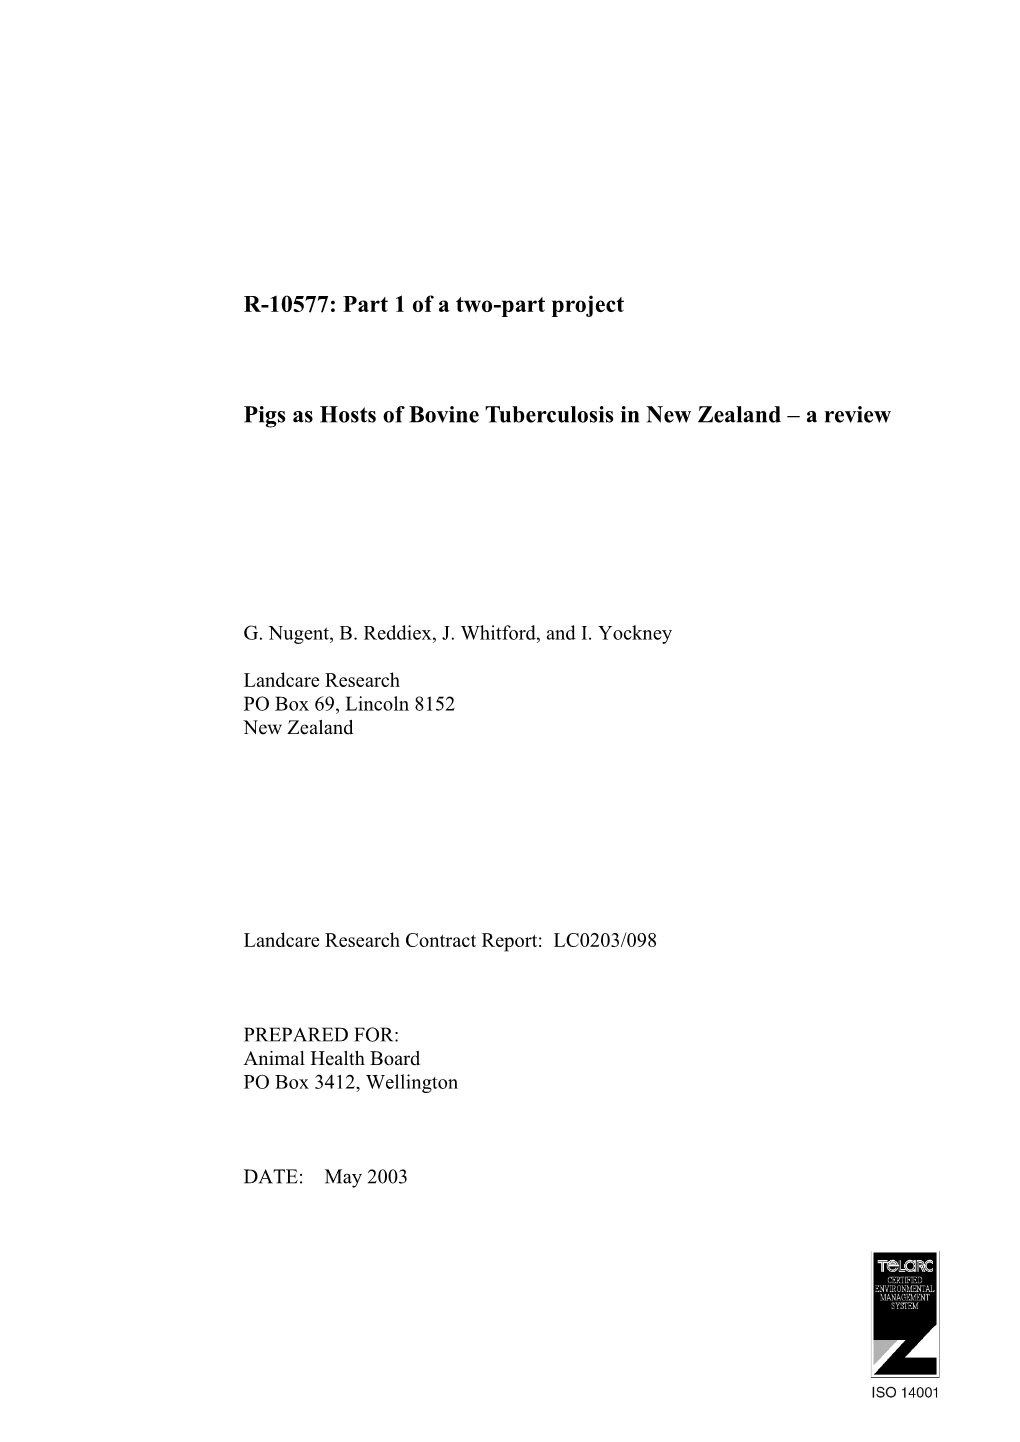 Pigs As Hosts of Bovine Tuberculosis in New Zealand – a Review